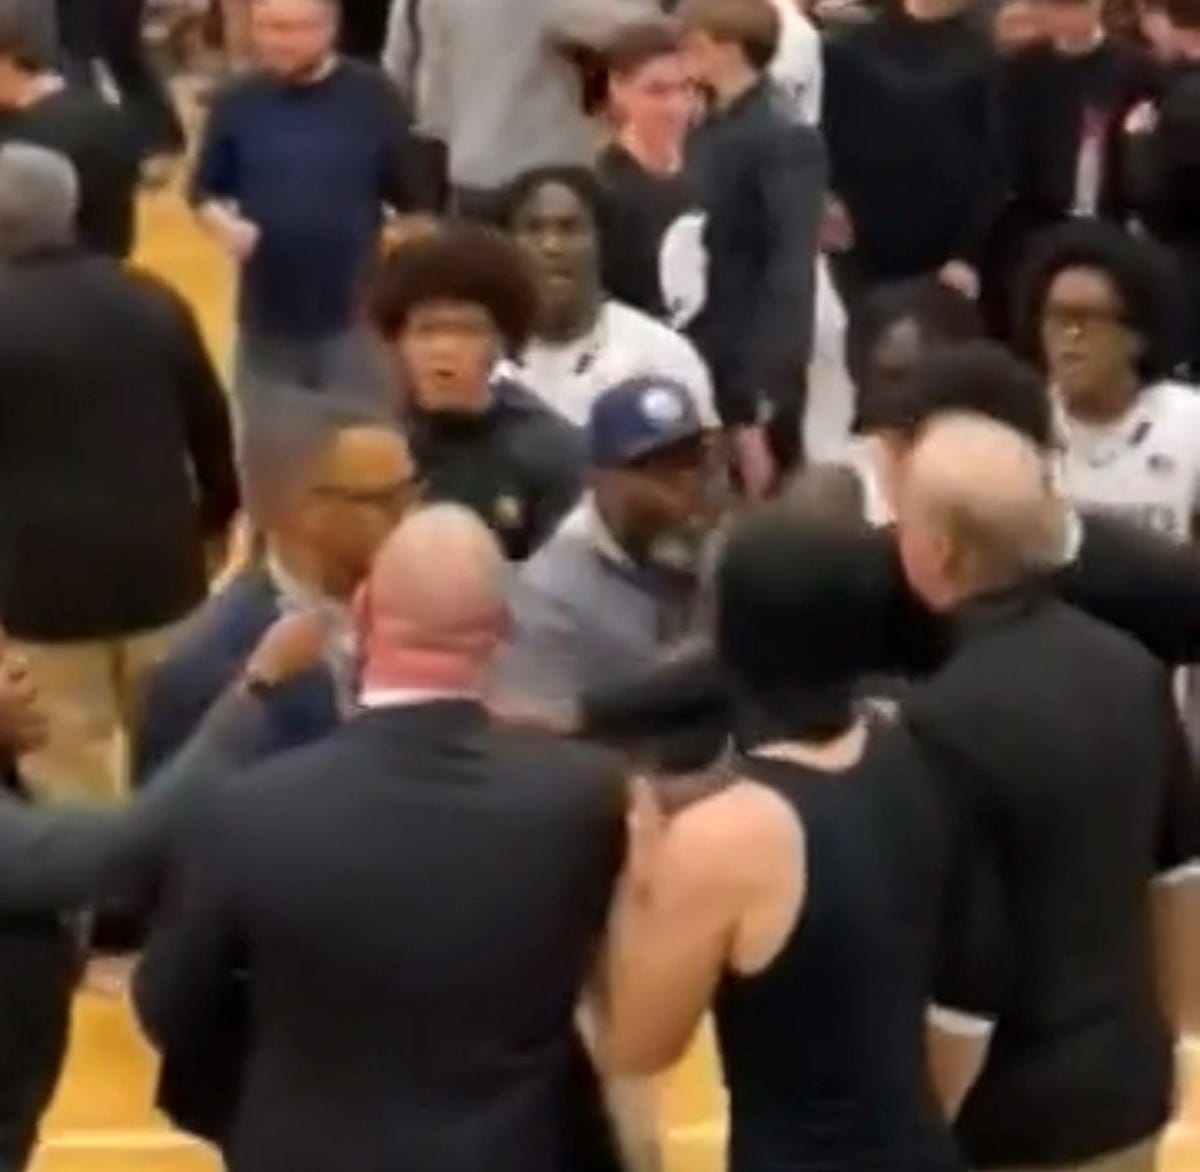 Delaware Basketball Coaches Suspended by DIAA for On-Court Altercation